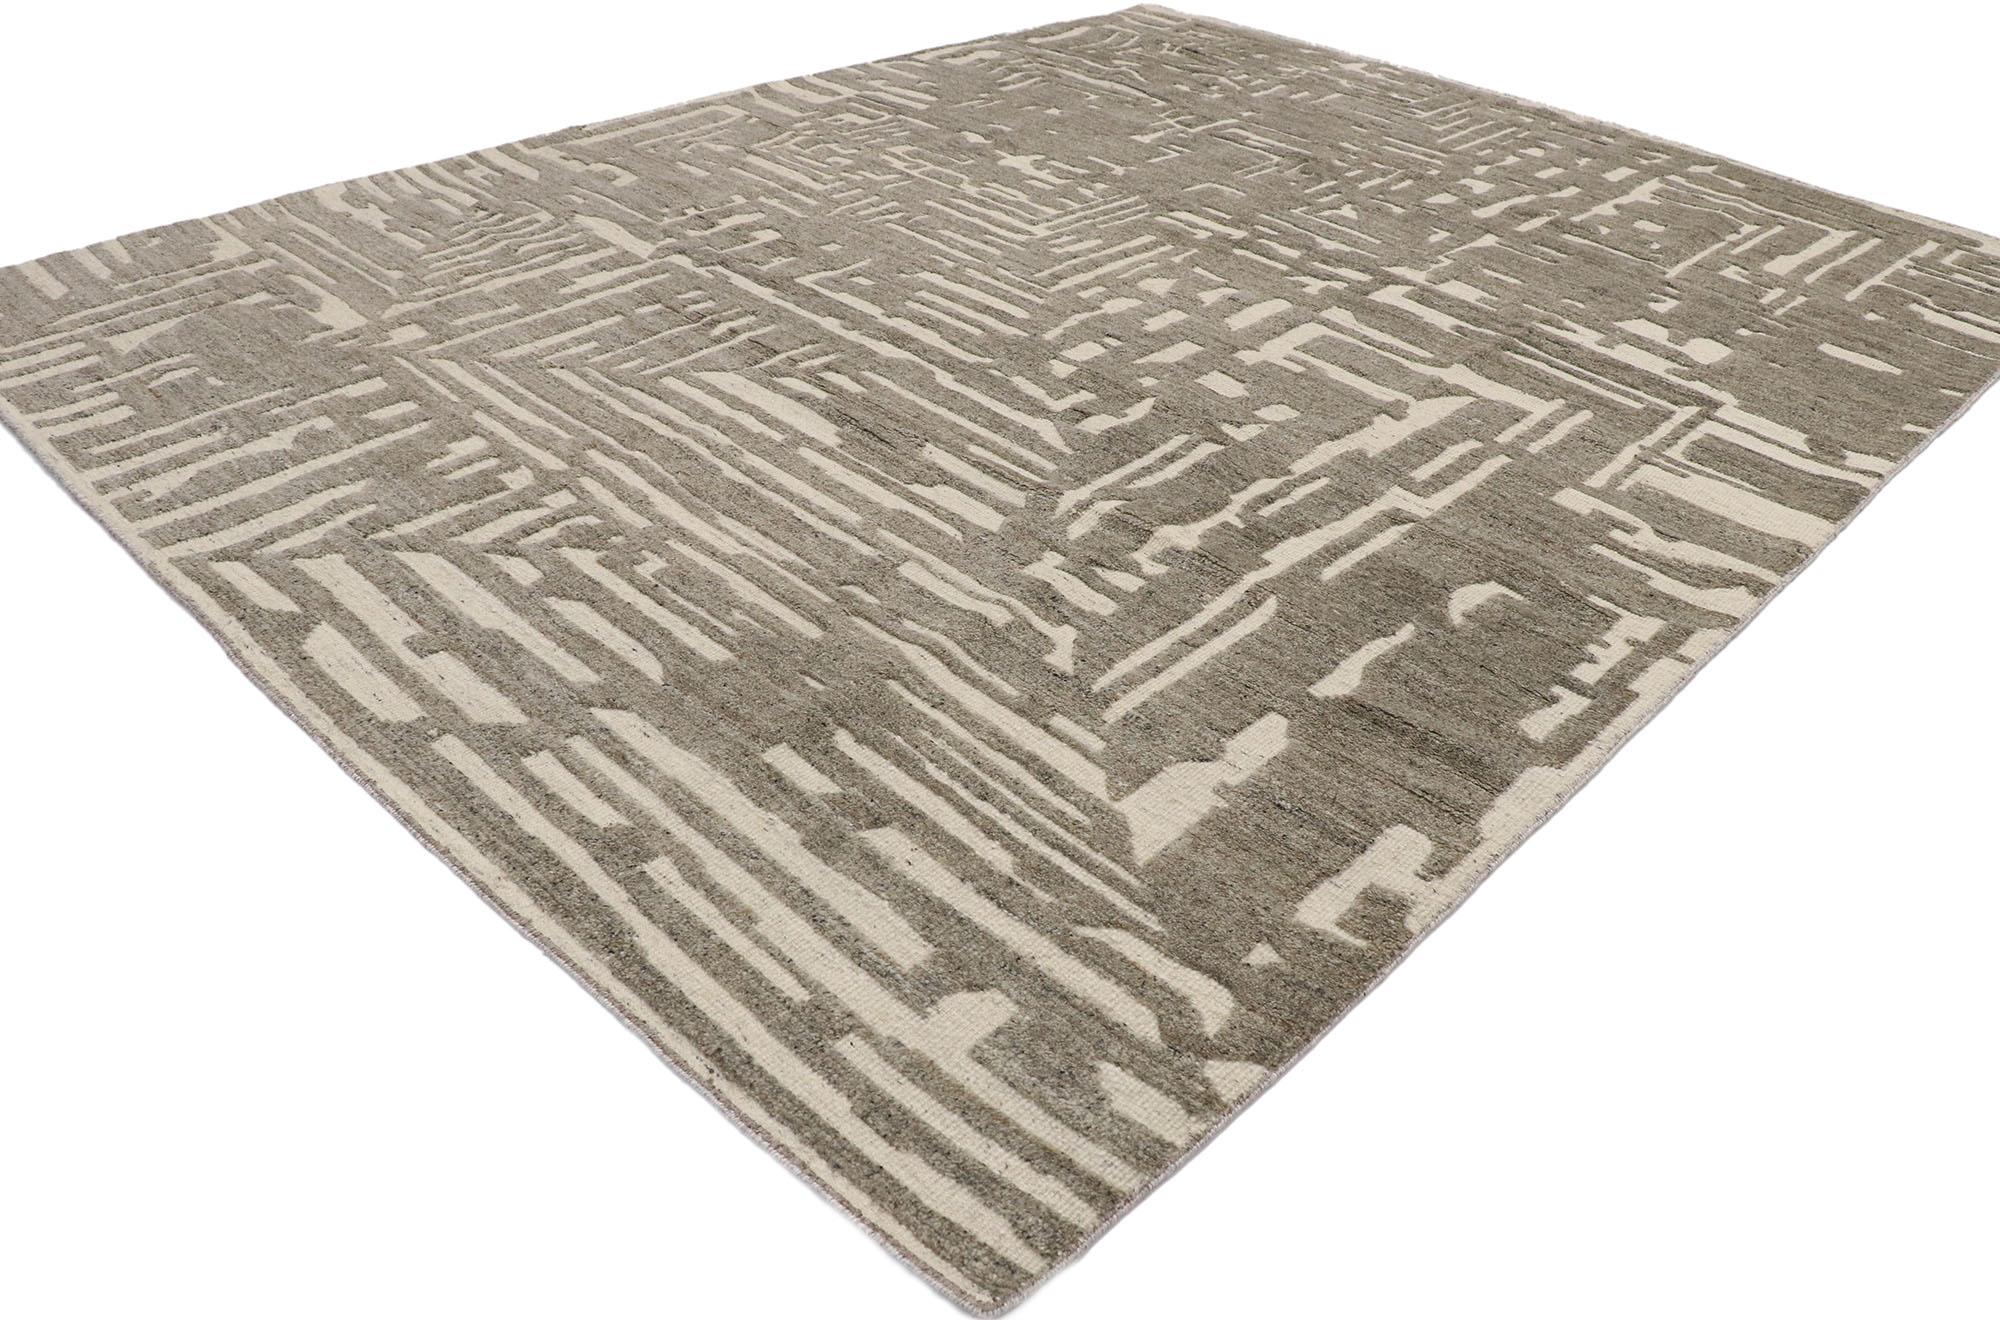 30556, New contemporary Moroccan style Souf rug with raised linear design. This hand knotted wool new contemporary Moroccan Souf Rug features a rectilinear pattern composed of intersecting lines overlaid upon a gray field. With a strong sense of